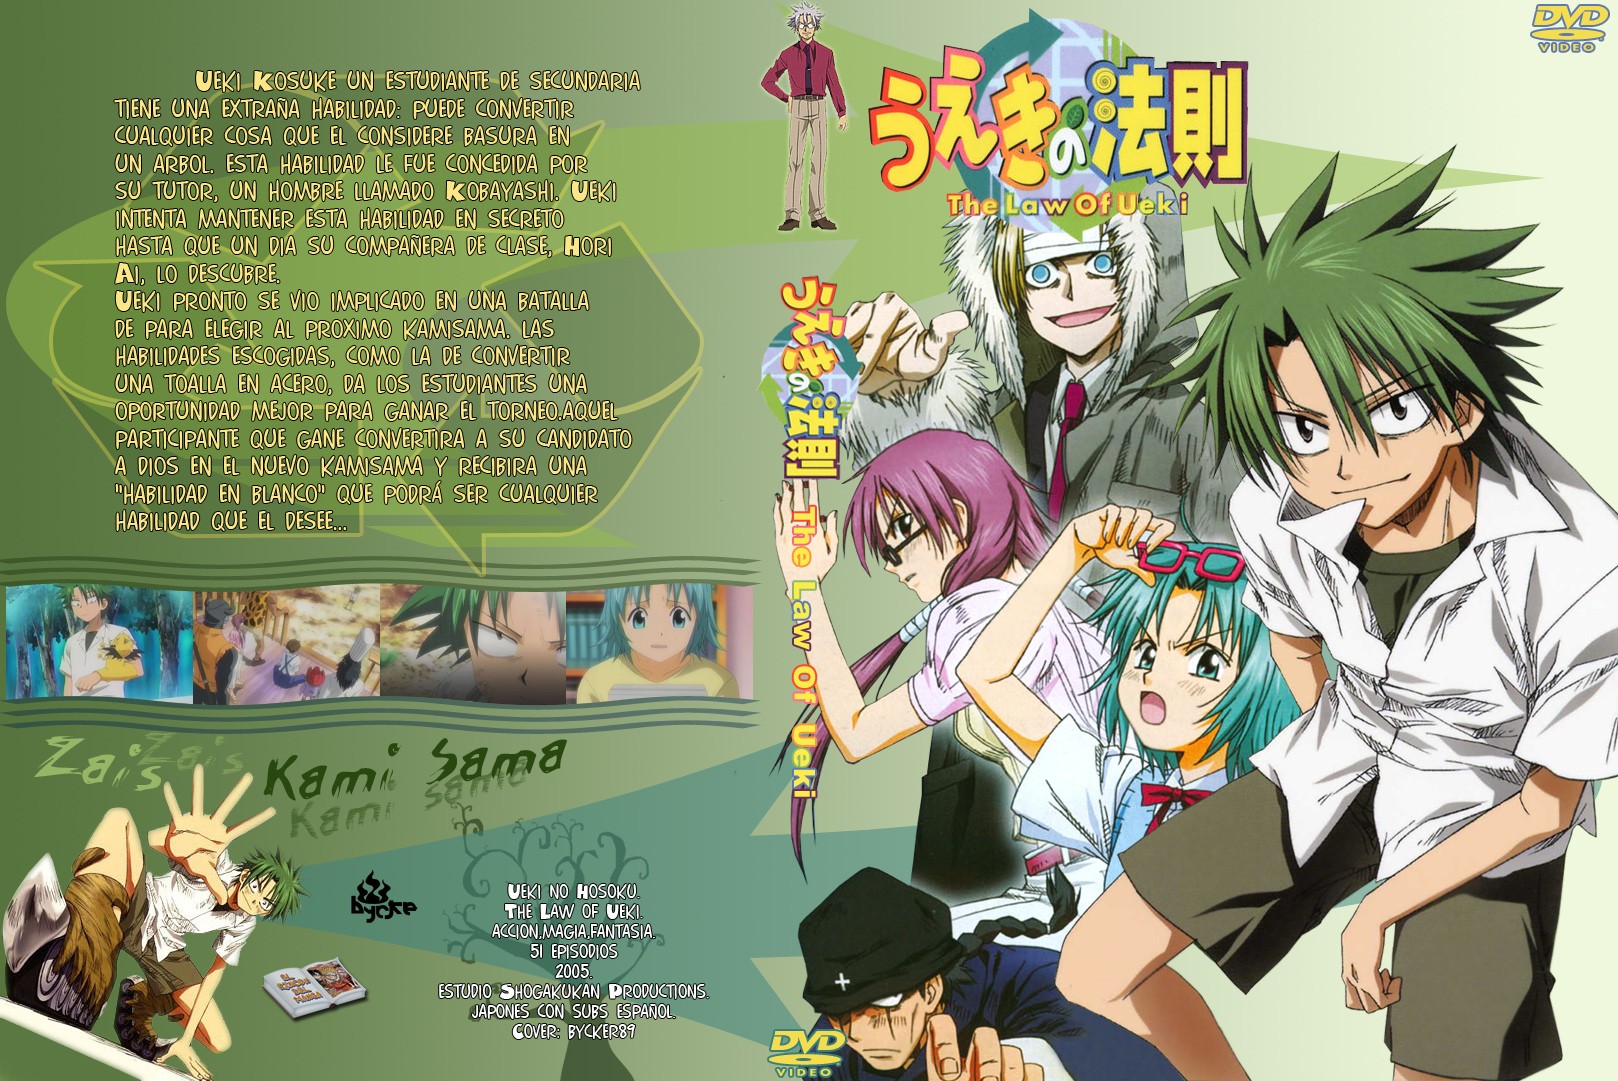 download the law of ueki full episode subtitle indonesia